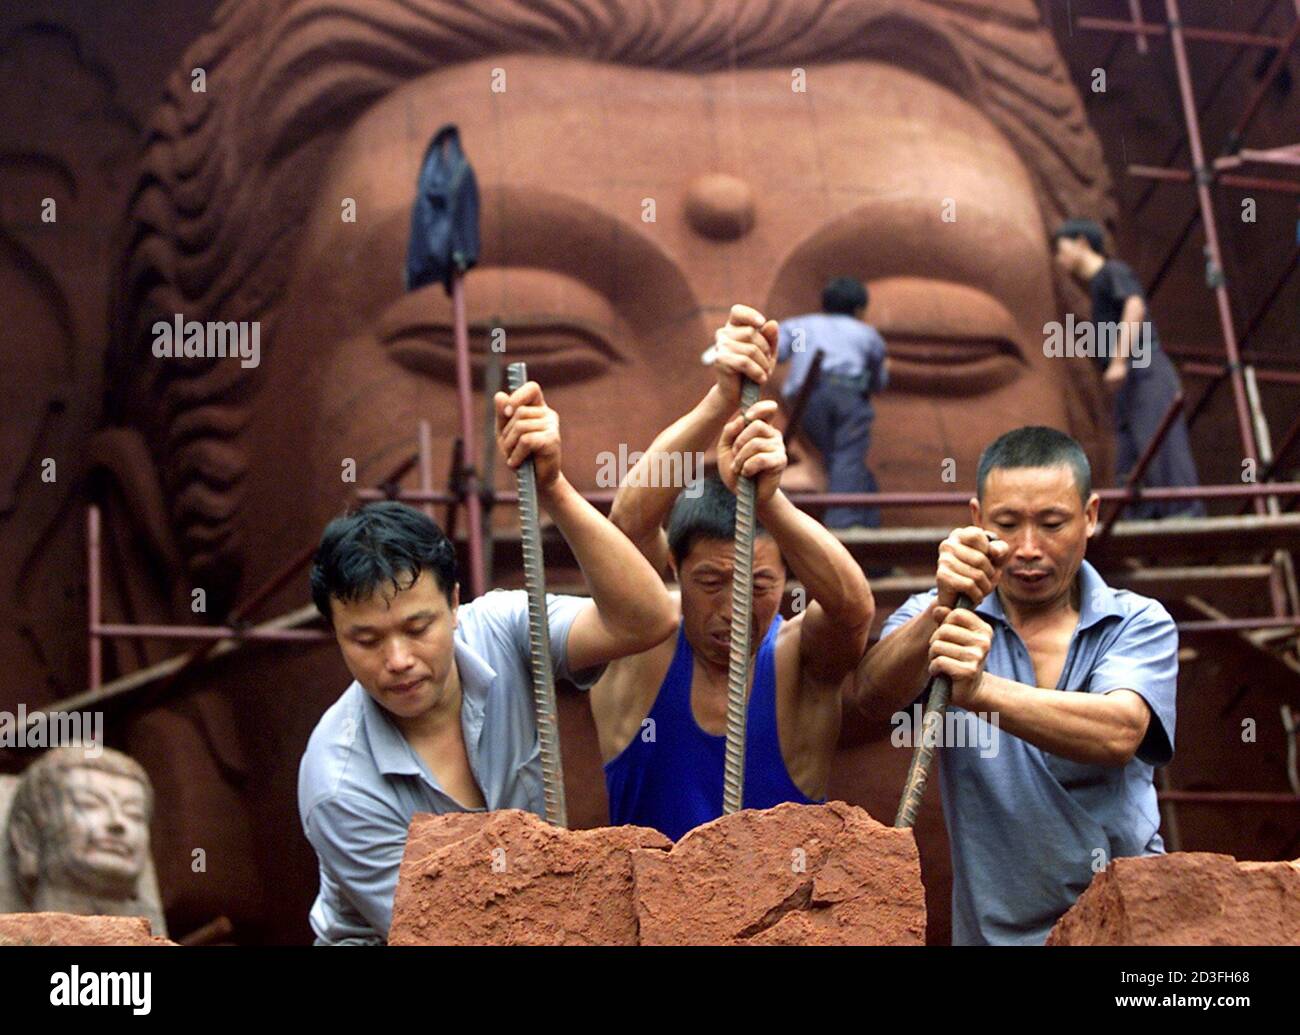 Chinese farmers build a replica of Afghanistan's Bamiyan Buddha statue at Leshan, in China's southwest Sichuan province September 20, 2001. A private Chinese company is creating replicas of the two figures that once stood in Afghanistan's Bamiyan Valley for 1,500 years. The statues were blown up by the Taliban regime in early March. One statue will be a life-size copy of the shorter Buddha, about 37 meters high, and the other a half-size replica of its 53-meter twin. The $200,000 project is scheduled for completion in May of next year. The taller figure has one noticeable flourish: a face. The Stock Photo